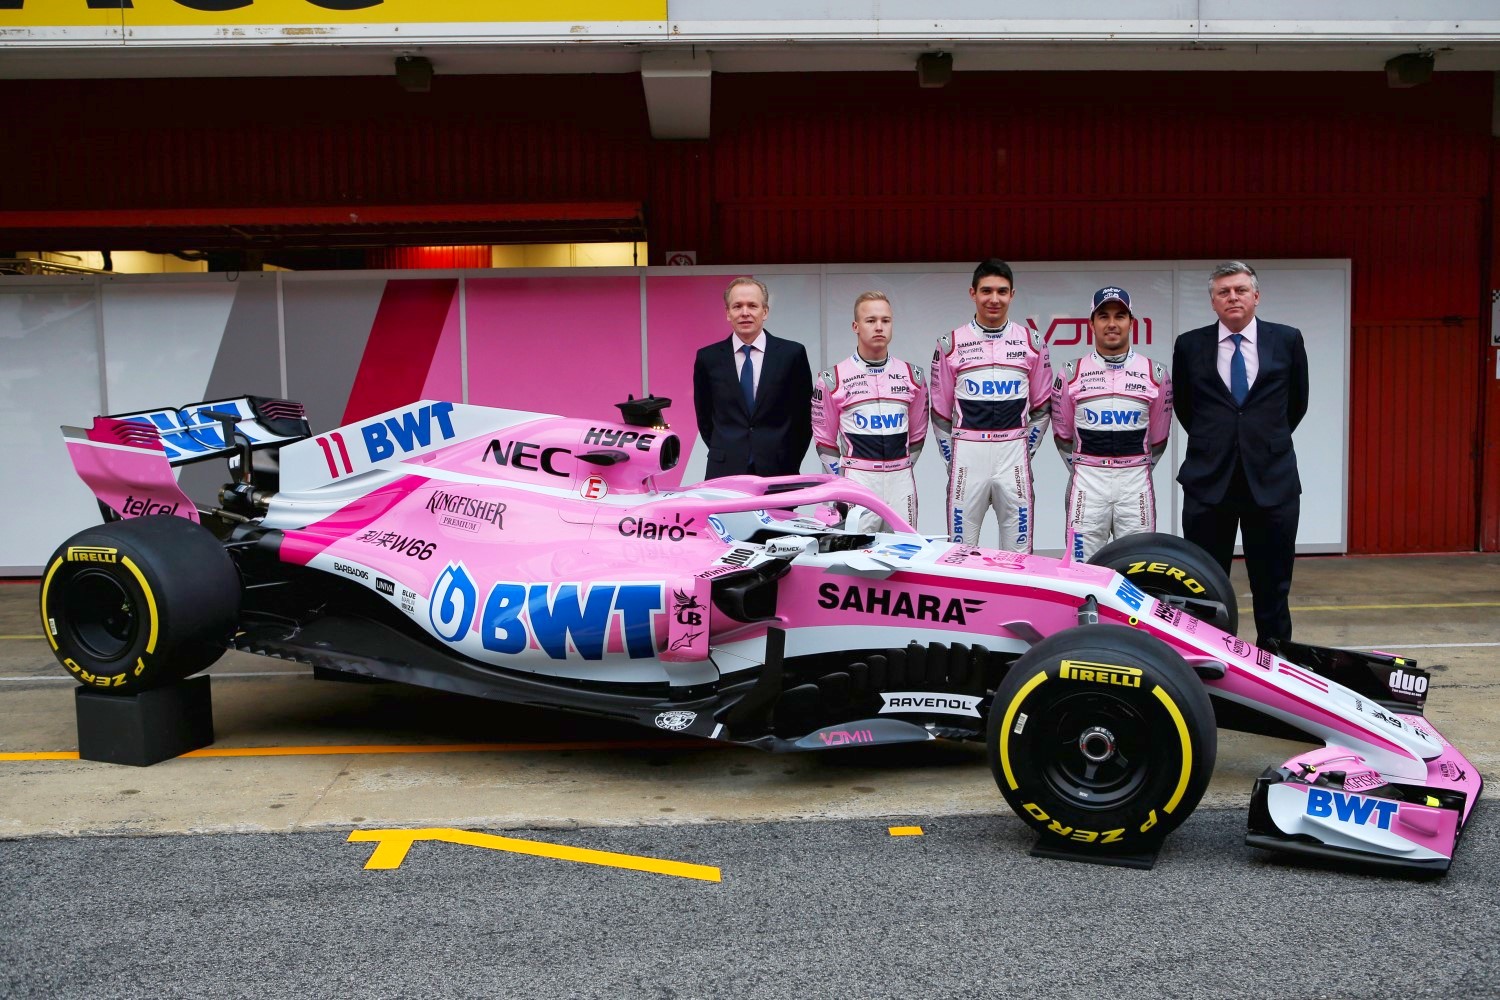 It is still called Force India for now